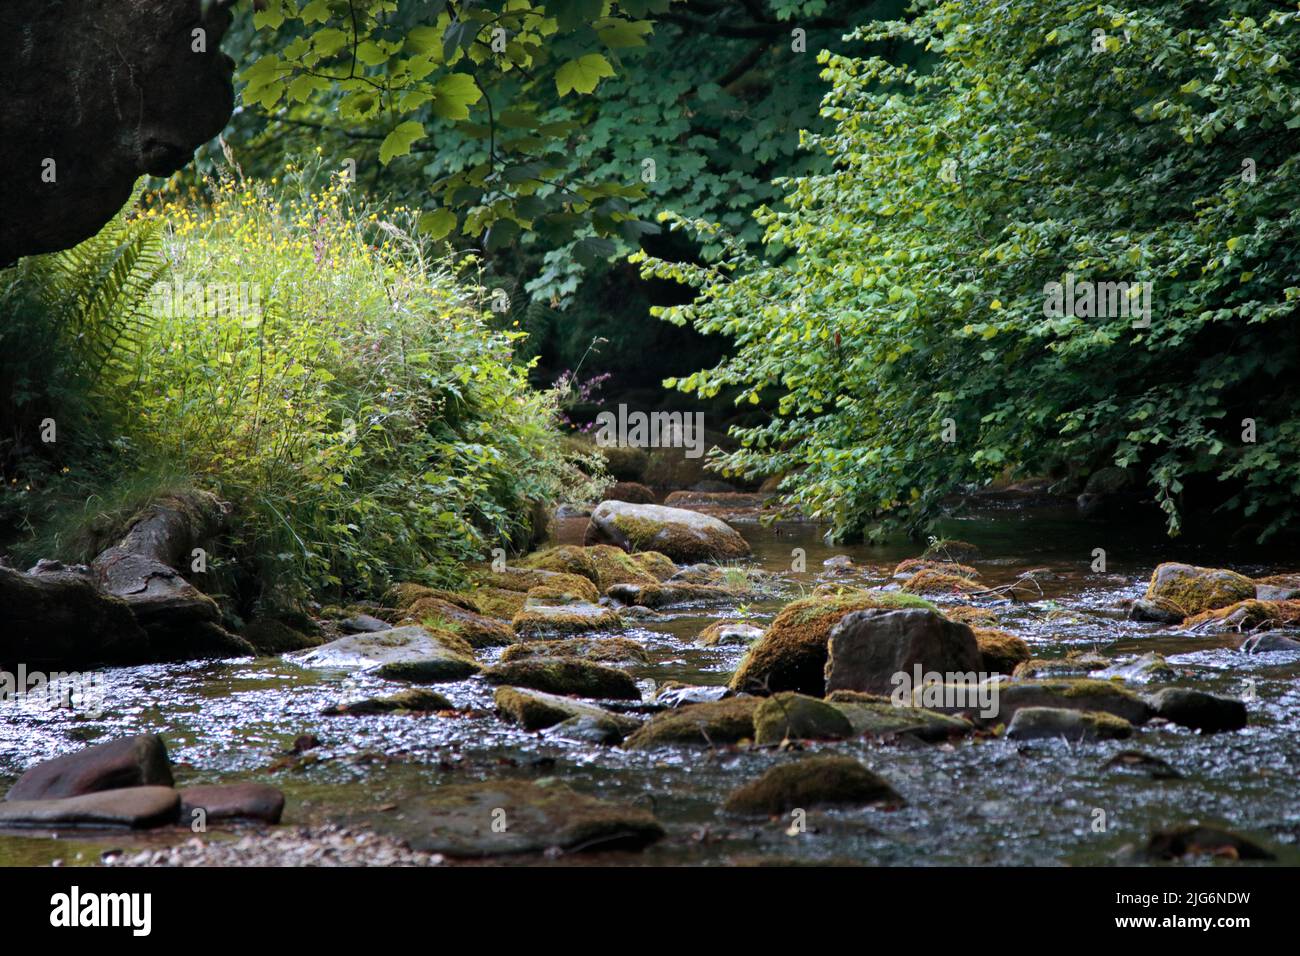 Fiume Clywegog a Nant Mill, Coedpoeth, Galles Foto Stock